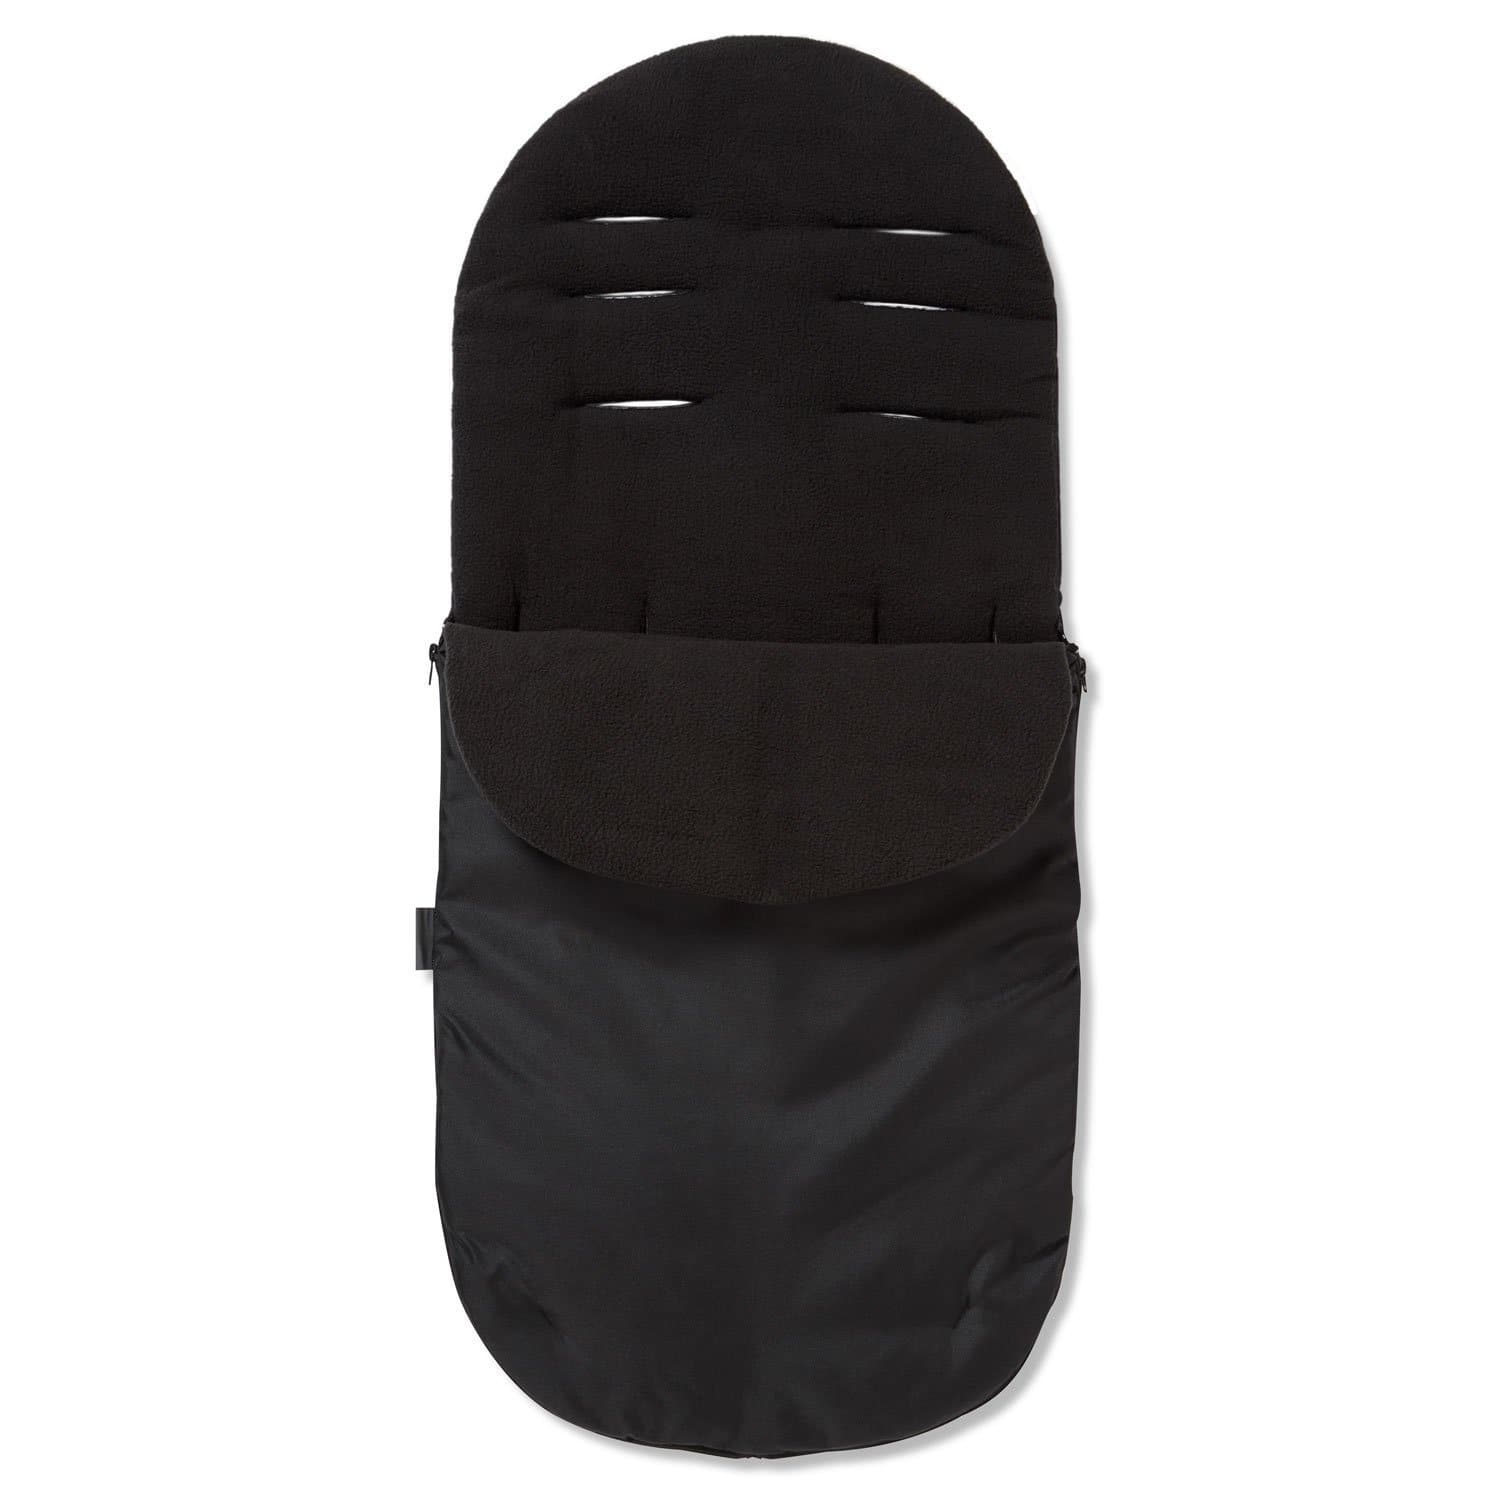 Footmuff / Cosy Toes Compatible with Tutti Bambini - Black / Fits All Models | For Your Little One